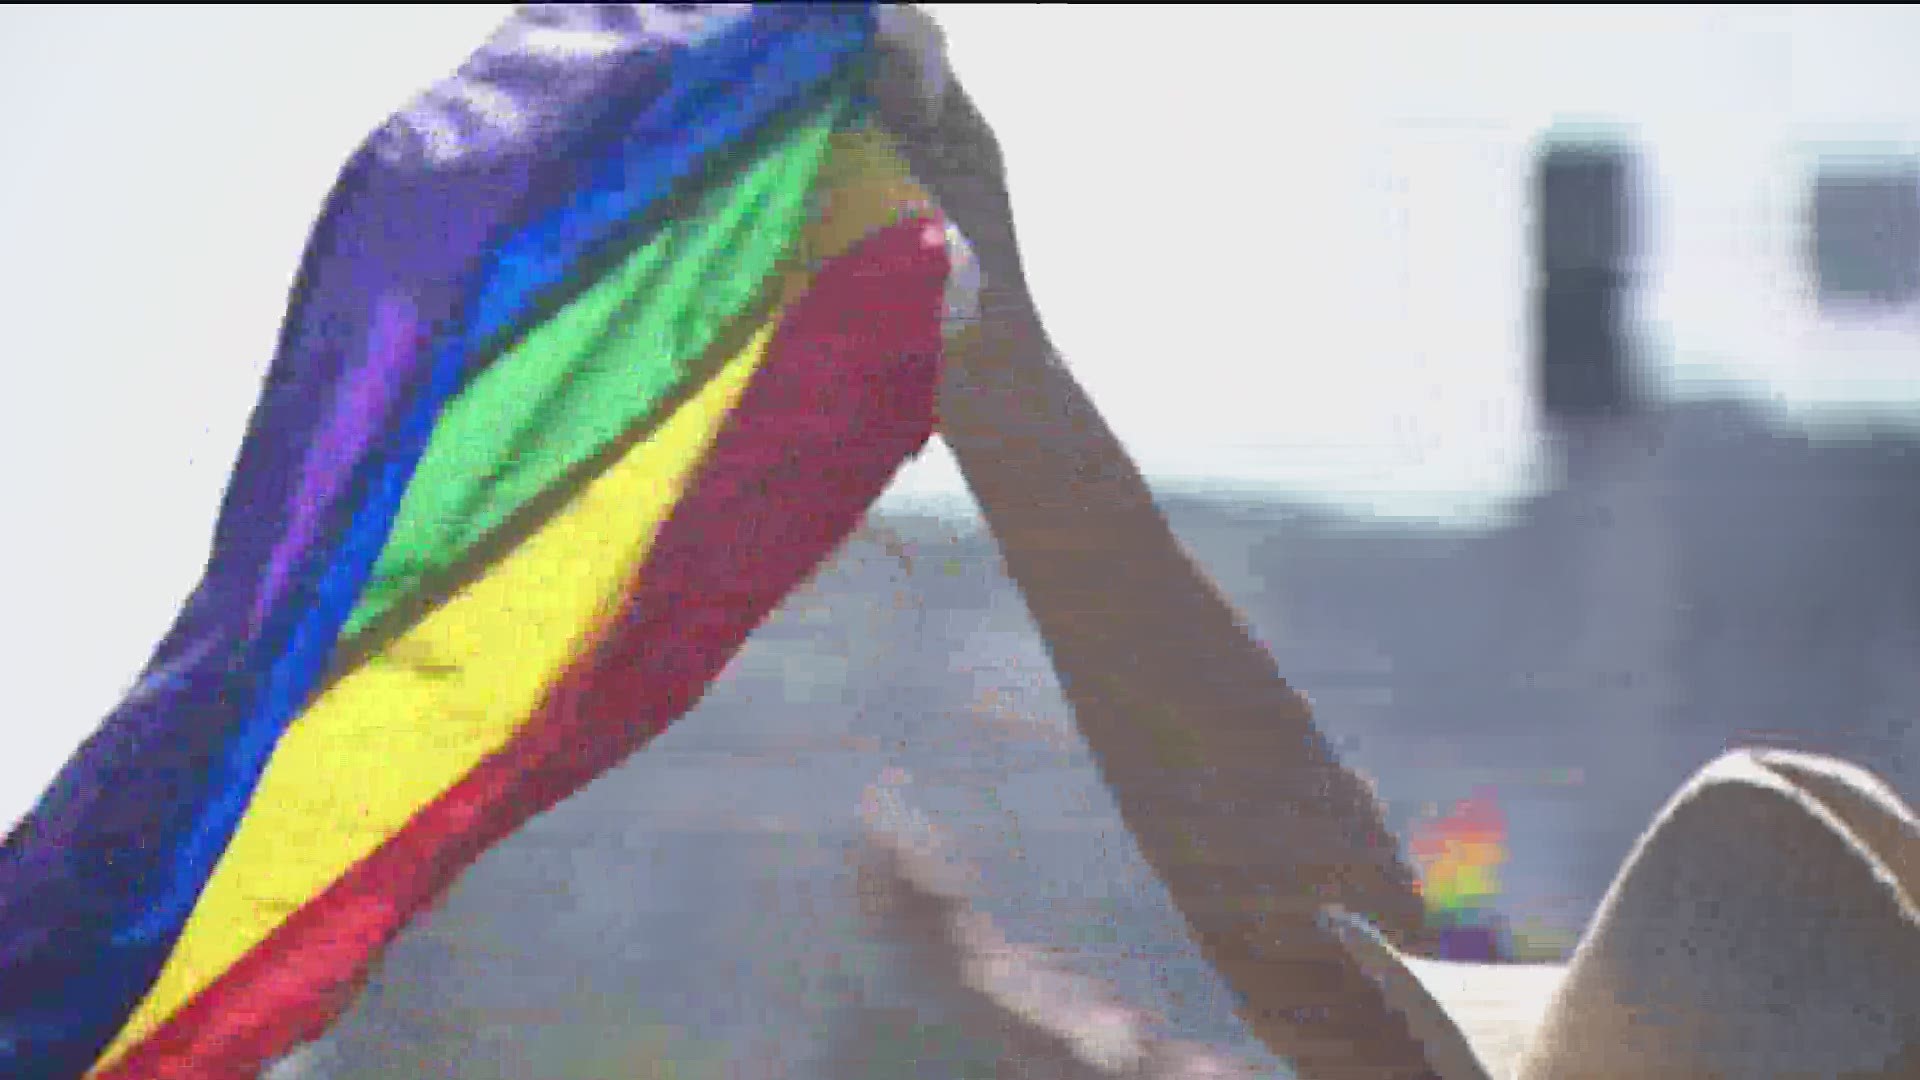 People are still finding virtual ways to celebrate pride.